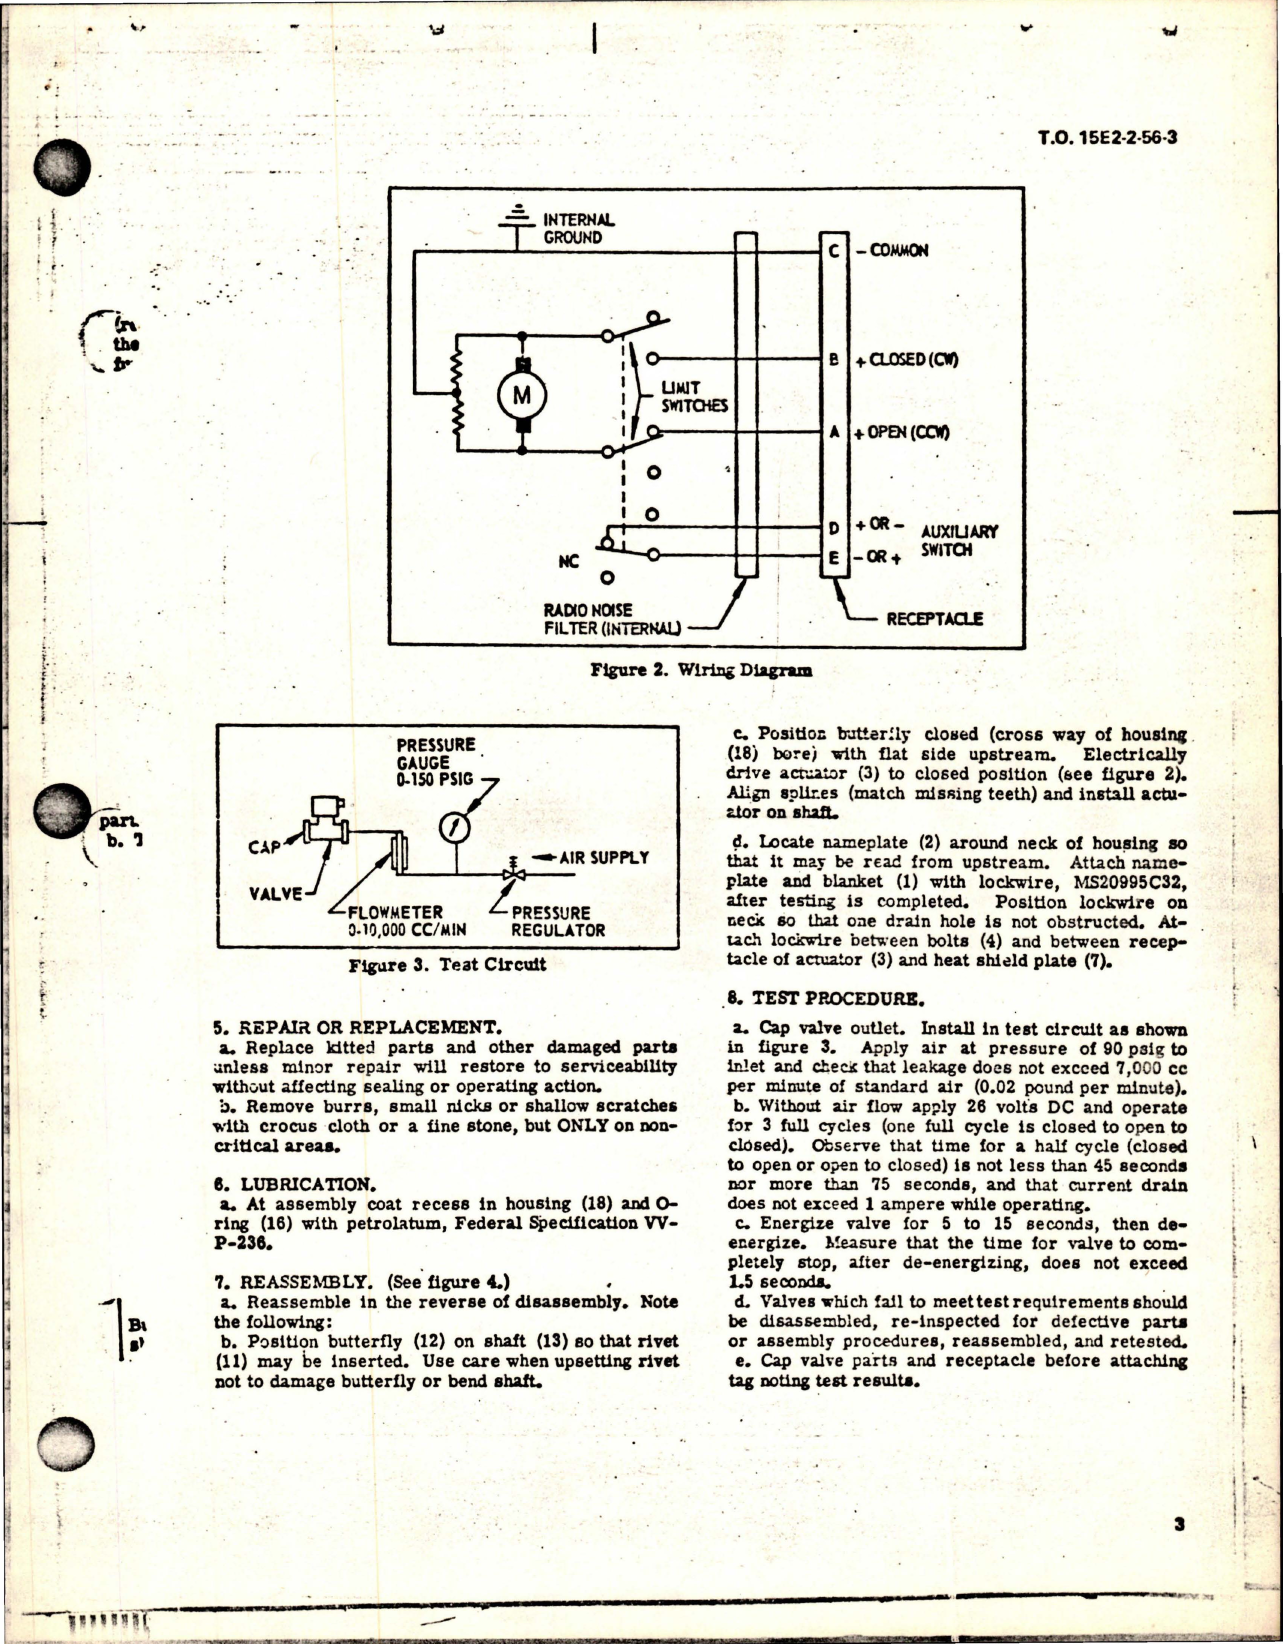 Sample page 5 from AirCorps Library document: Overhaul with Parts Breakdown for Modulating Hot Air Valve - Part 67-2790-001 